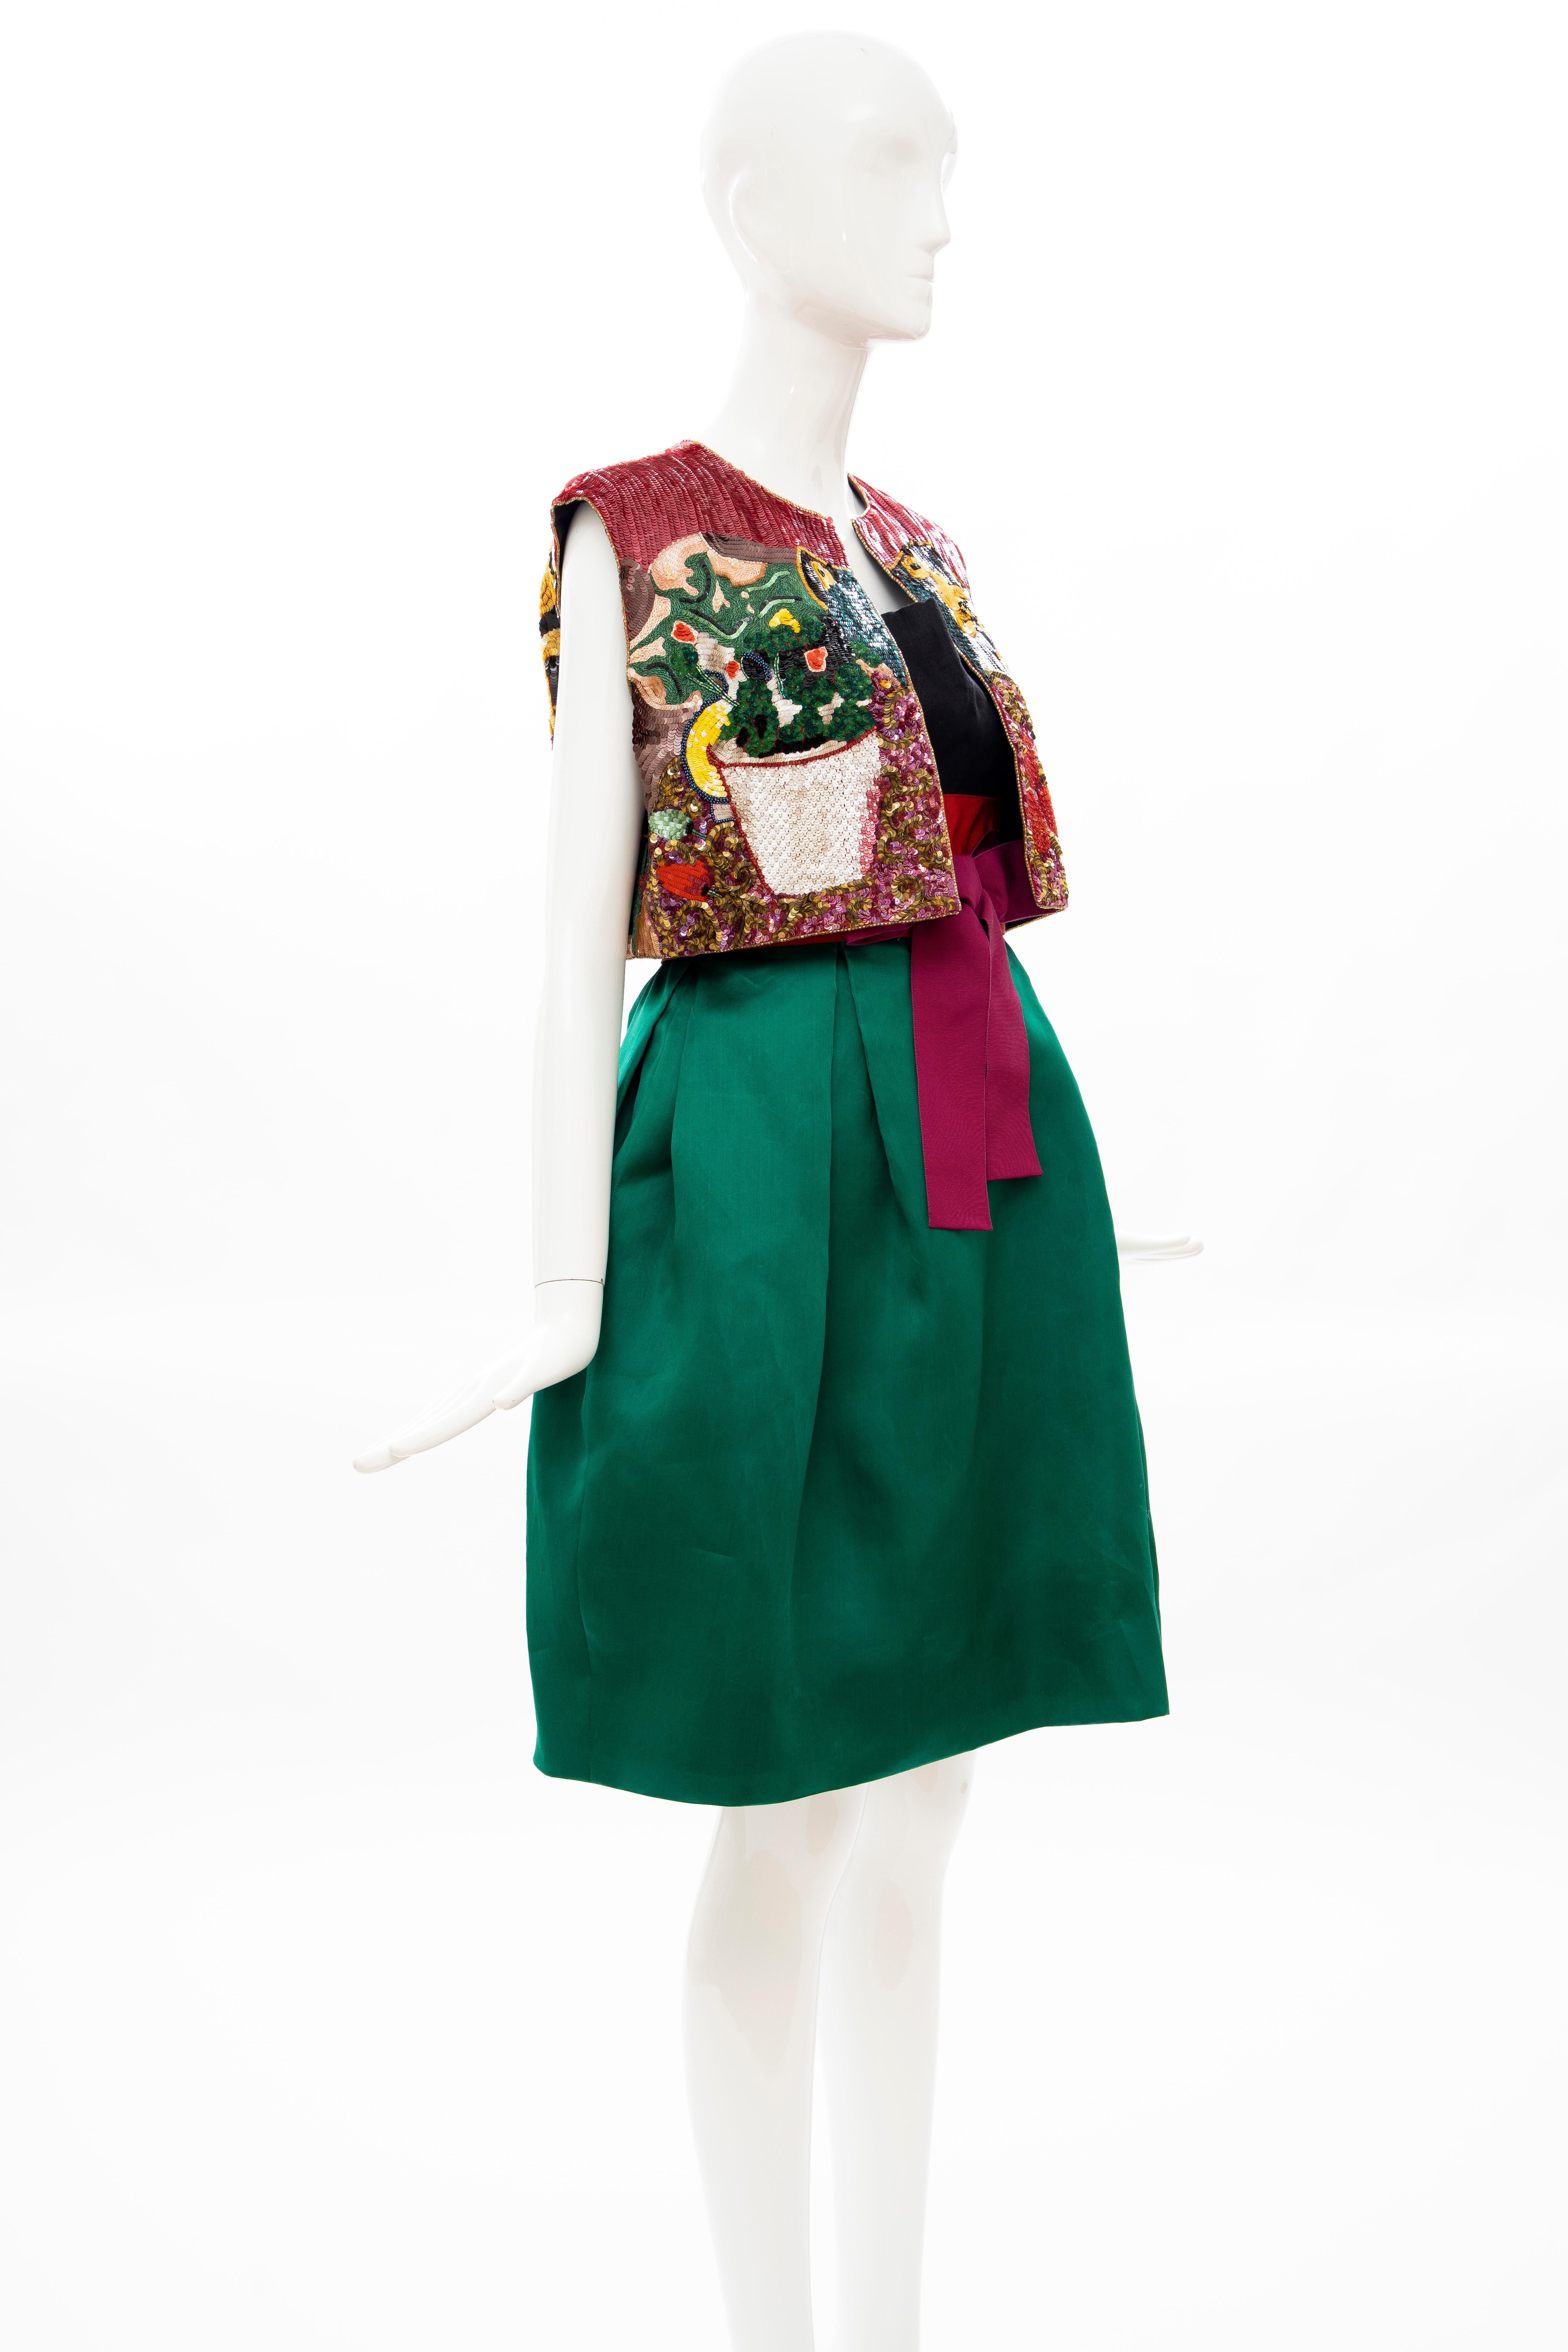 Bill Blass Matisse Inspired Embroidered Sequined Dress Ensemble, Spring 1988 For Sale 1